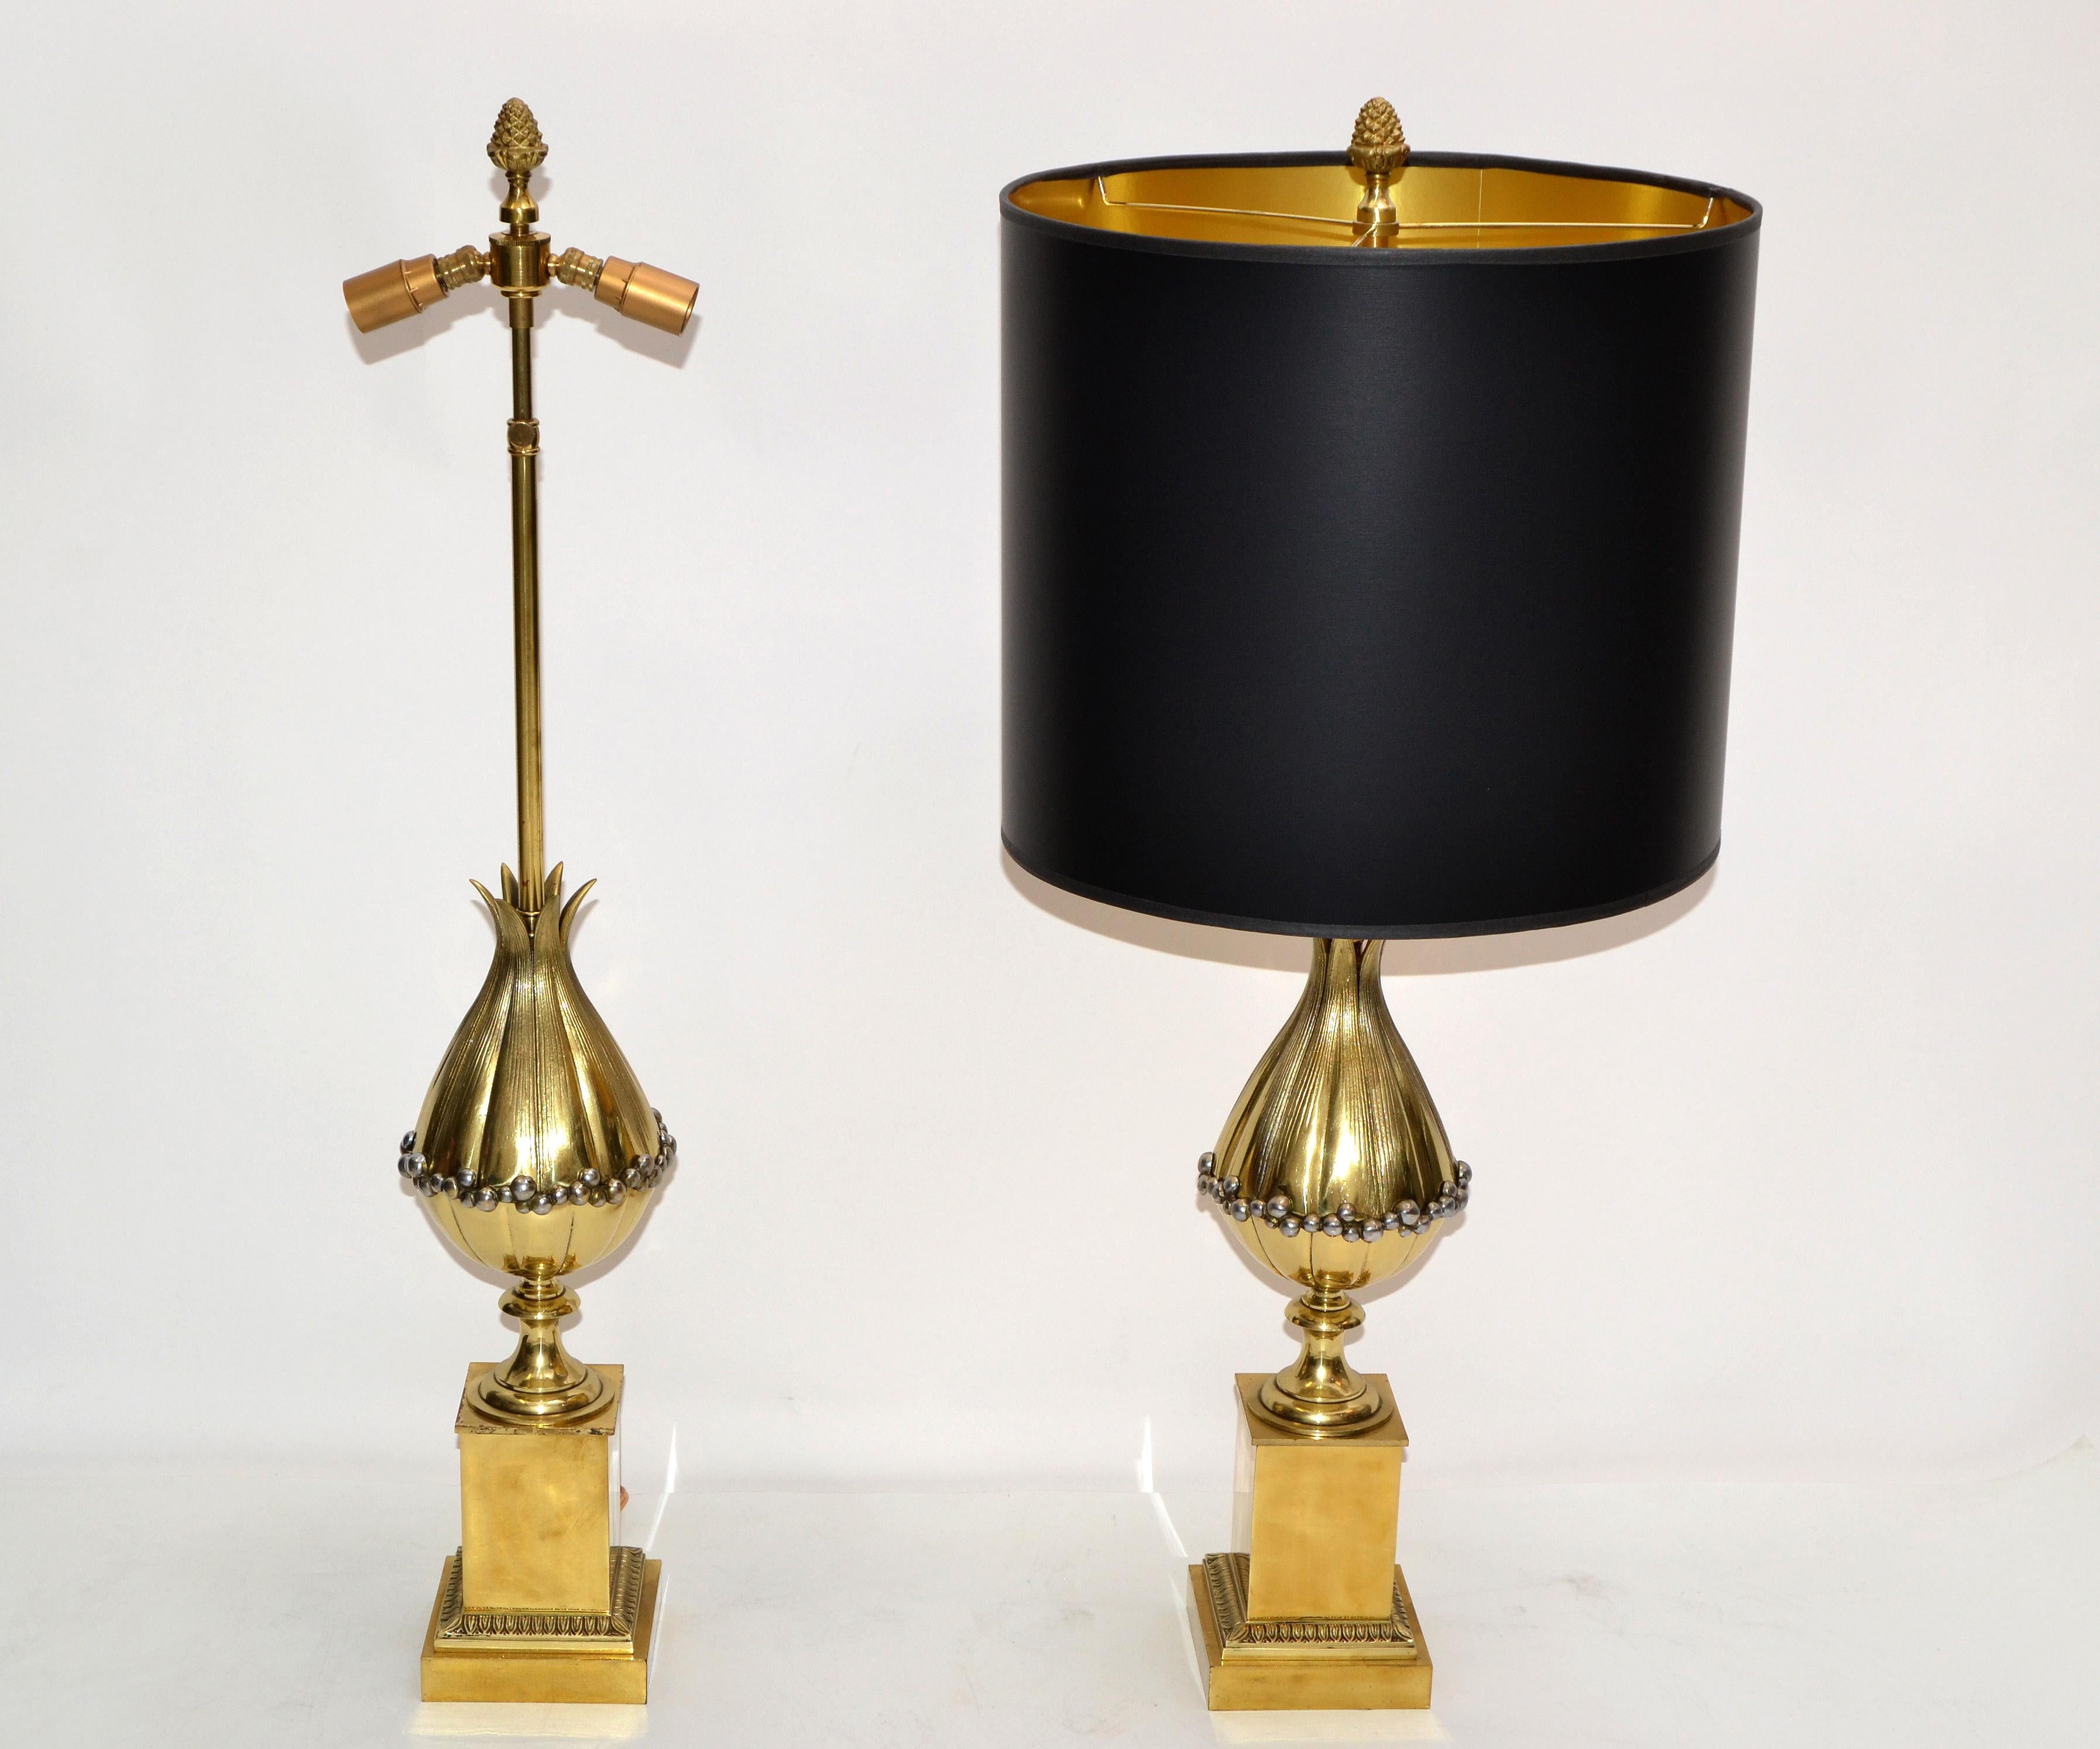 Maison Charles French Art Deco Lotus Bronze Table Lamp Black & Gold Shade, Pair For Sale 8